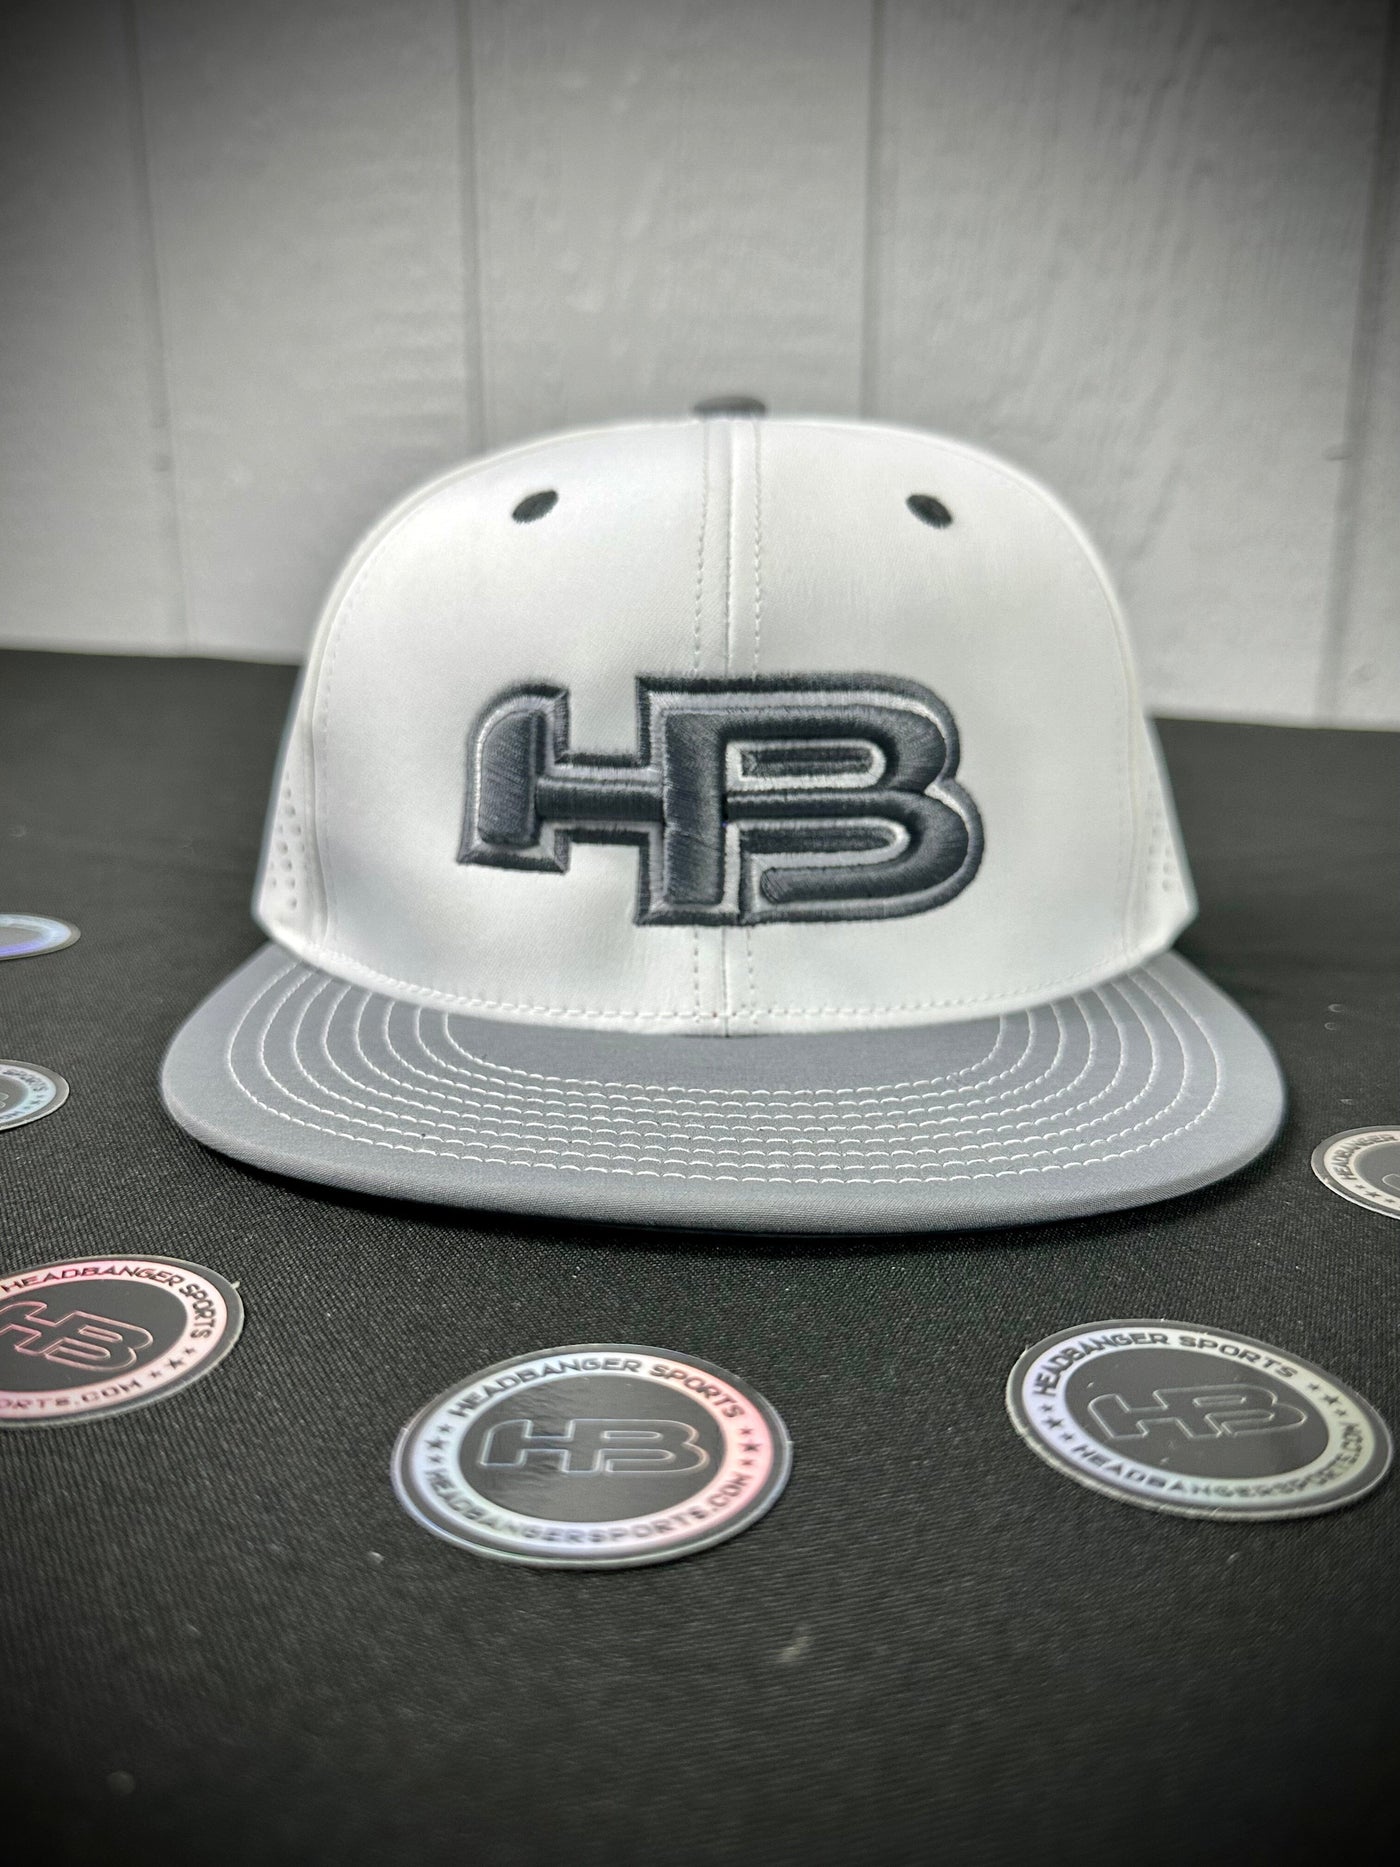 HB Sports Exclusive ES471 Fitted Baseball and Softball Hat: Clean White SM/MD